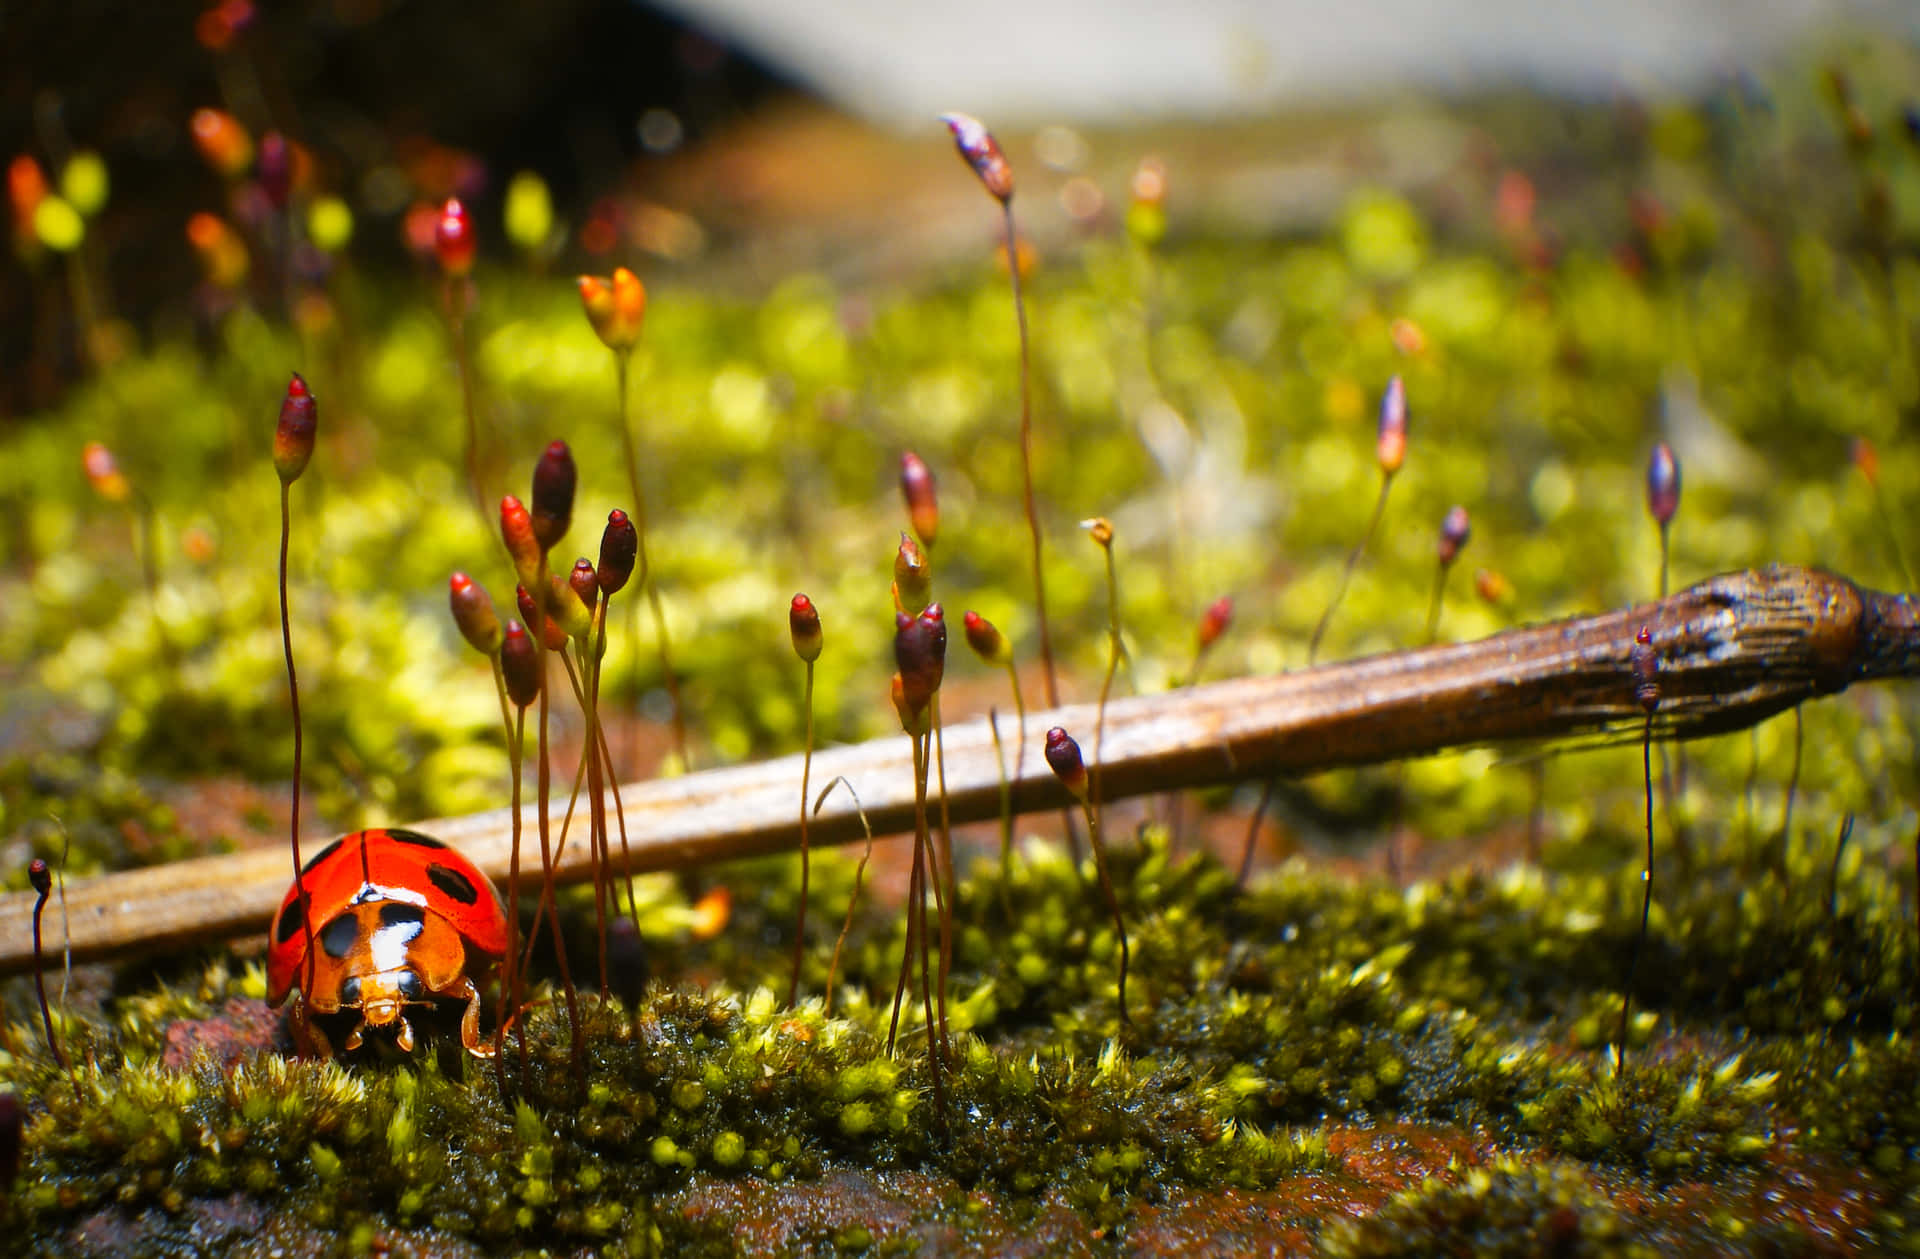 A Ladybug Is Sitting On A Stick In Moss